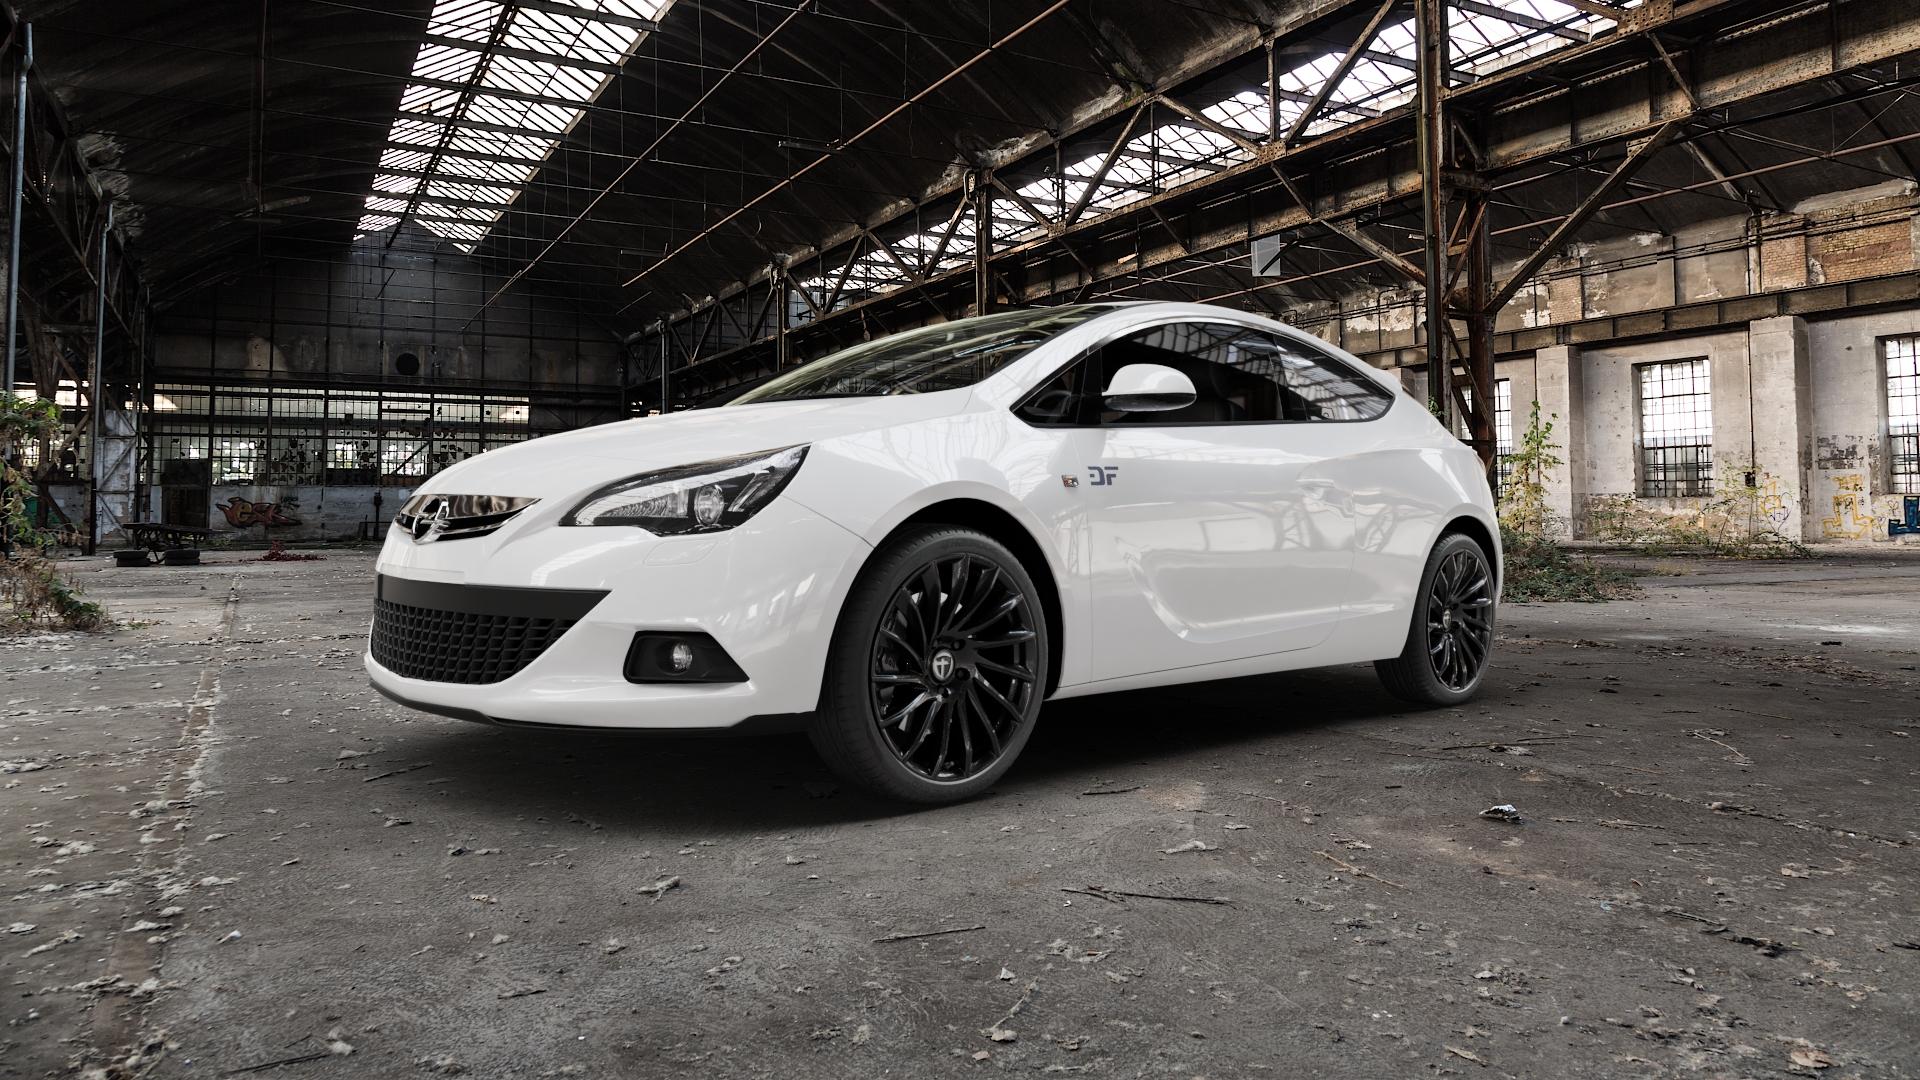 Opel - Astra J GTC Type P-J/SW Wheels and Tyre Packages